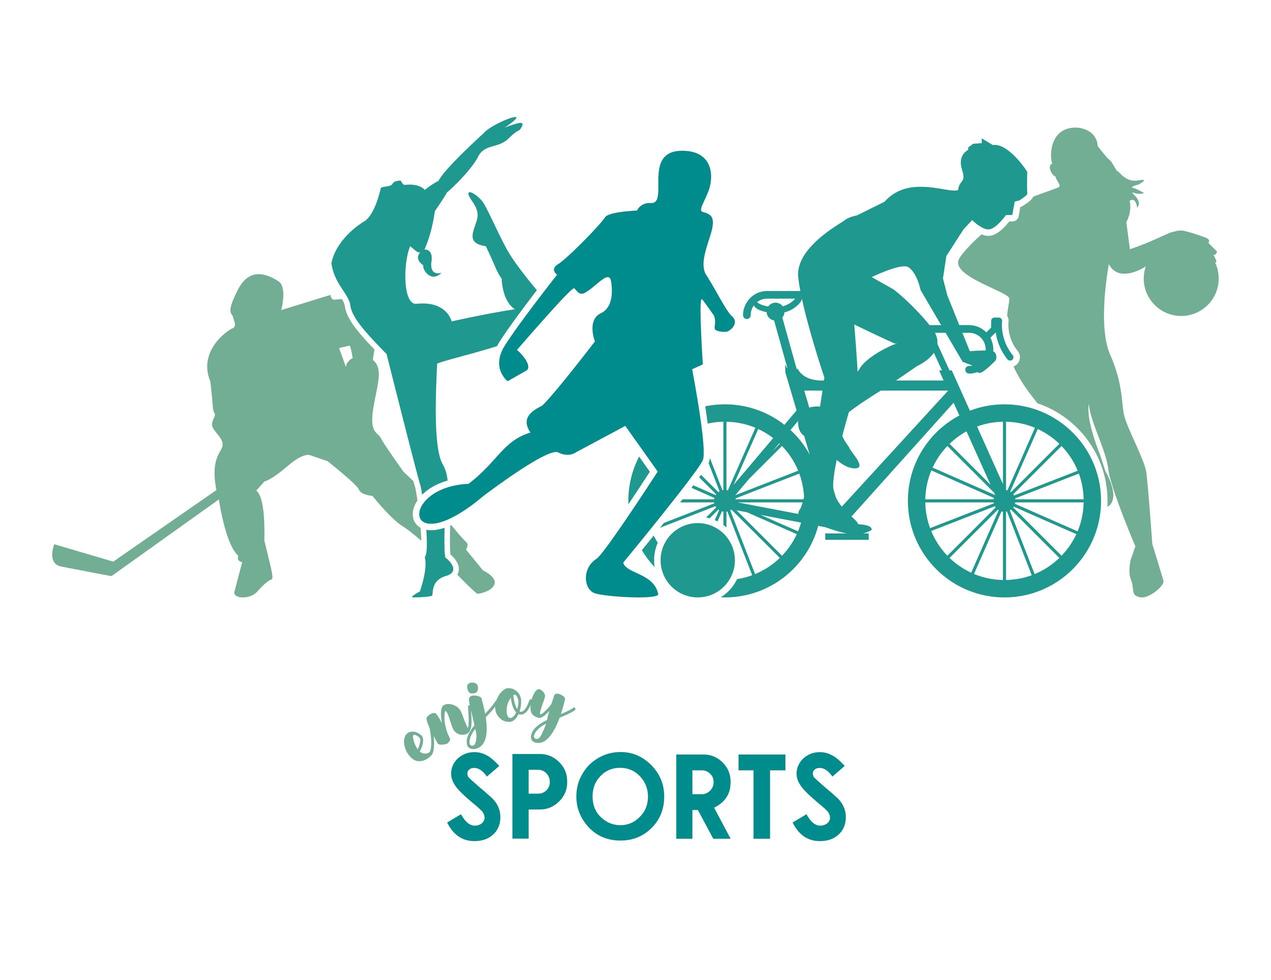 sports time poster with green athletes figures silhouettes vector